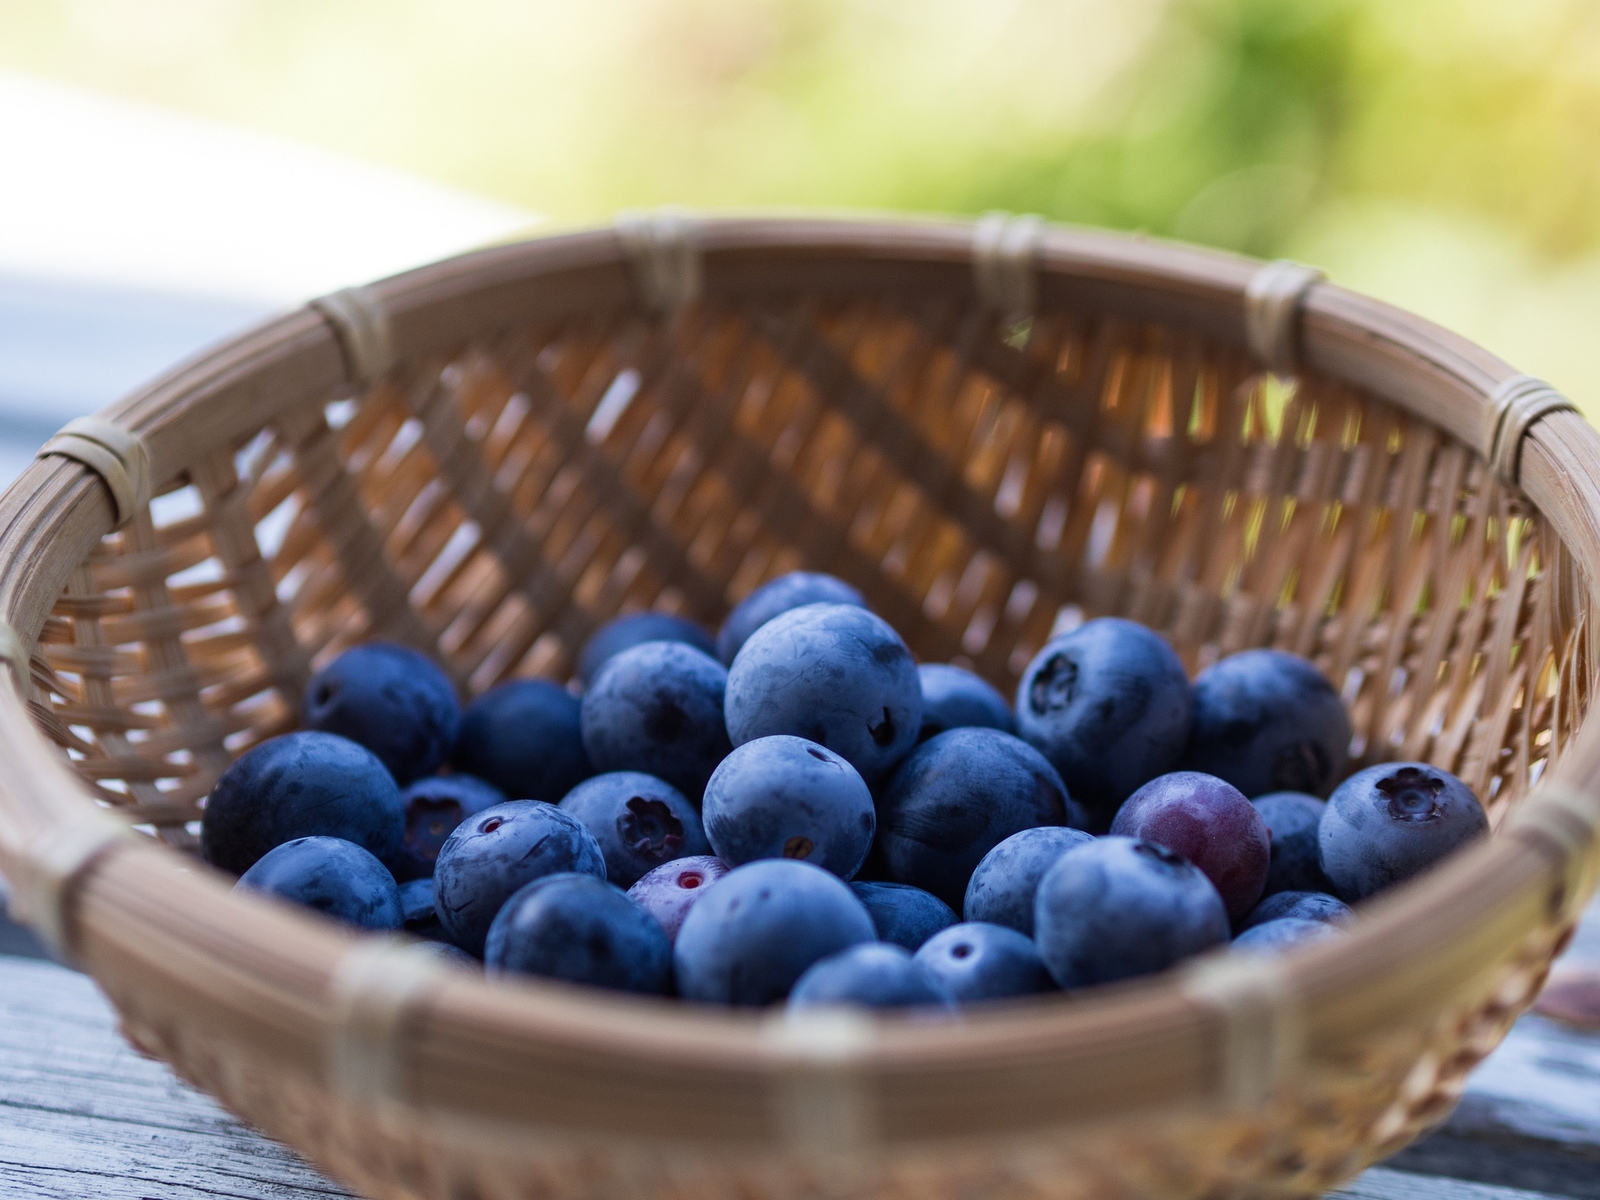 Basket of Blueberries for 1600 x 1200 resolution